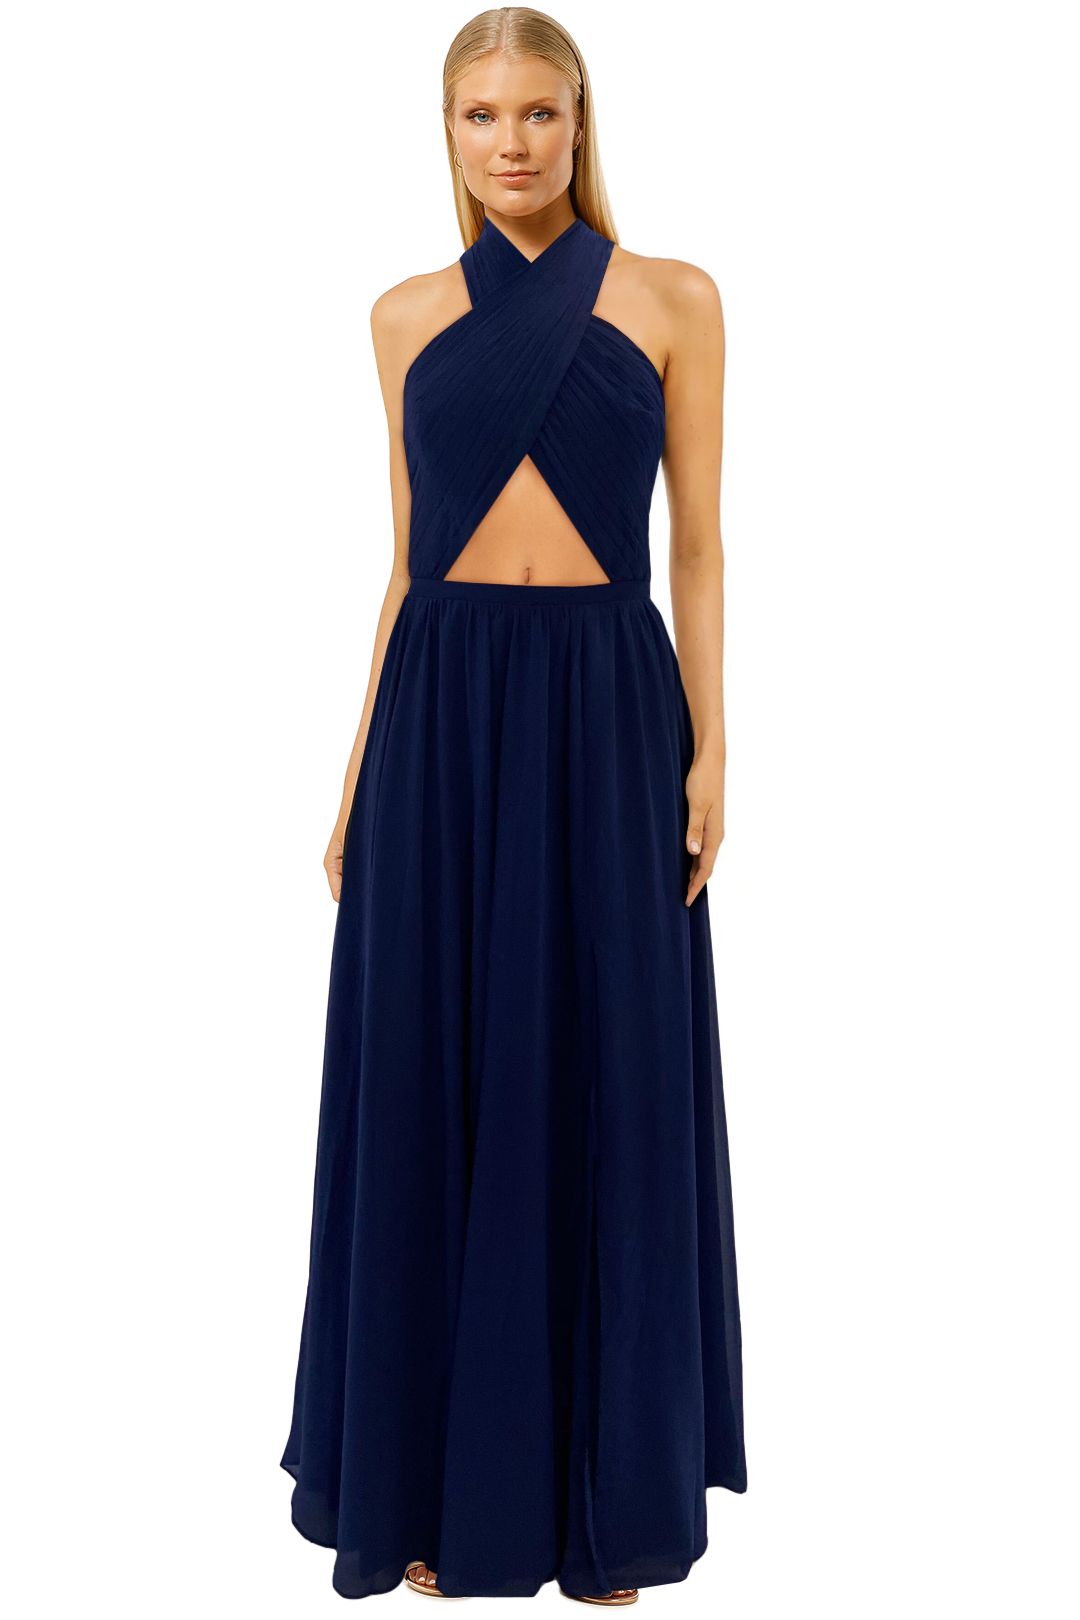 Wired Heart in Navy Maxi Dress by Fame & Partners to Buy | GlamCorner